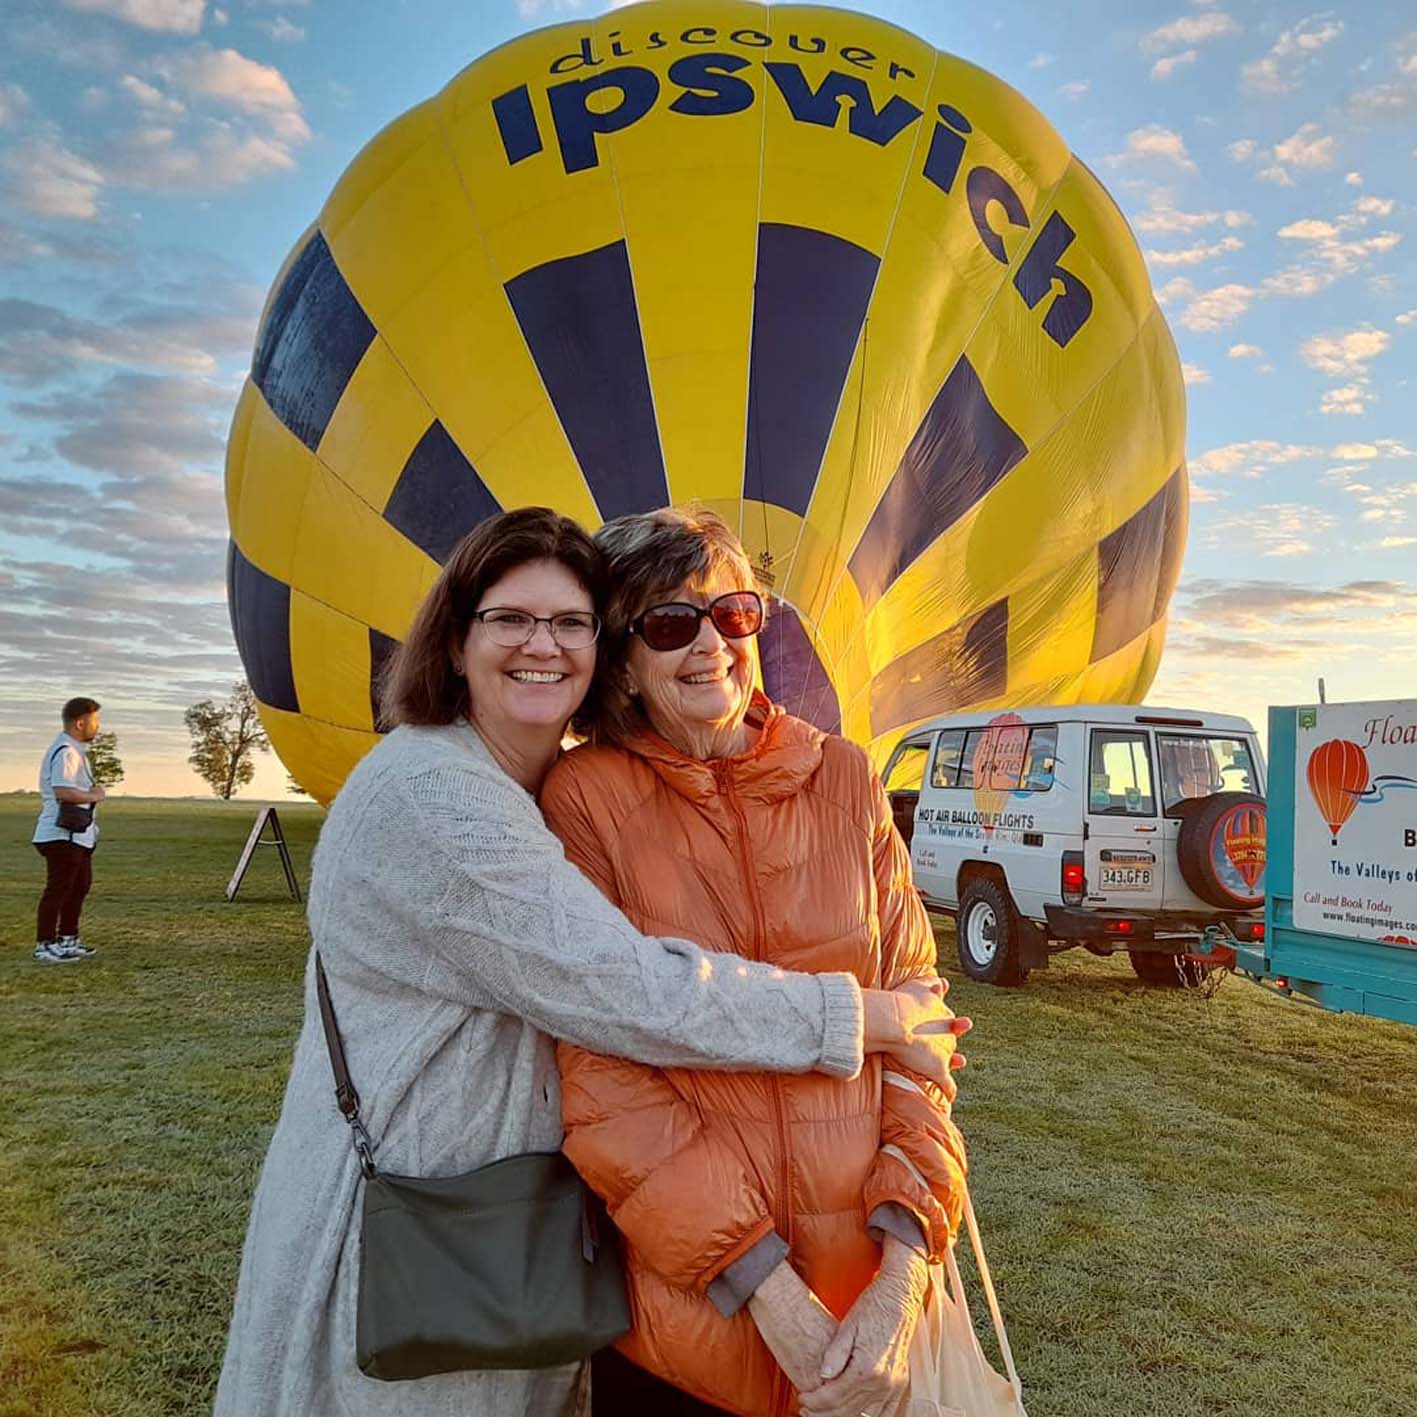 Treat mum with a Floating Images Hot Air Balloon ride